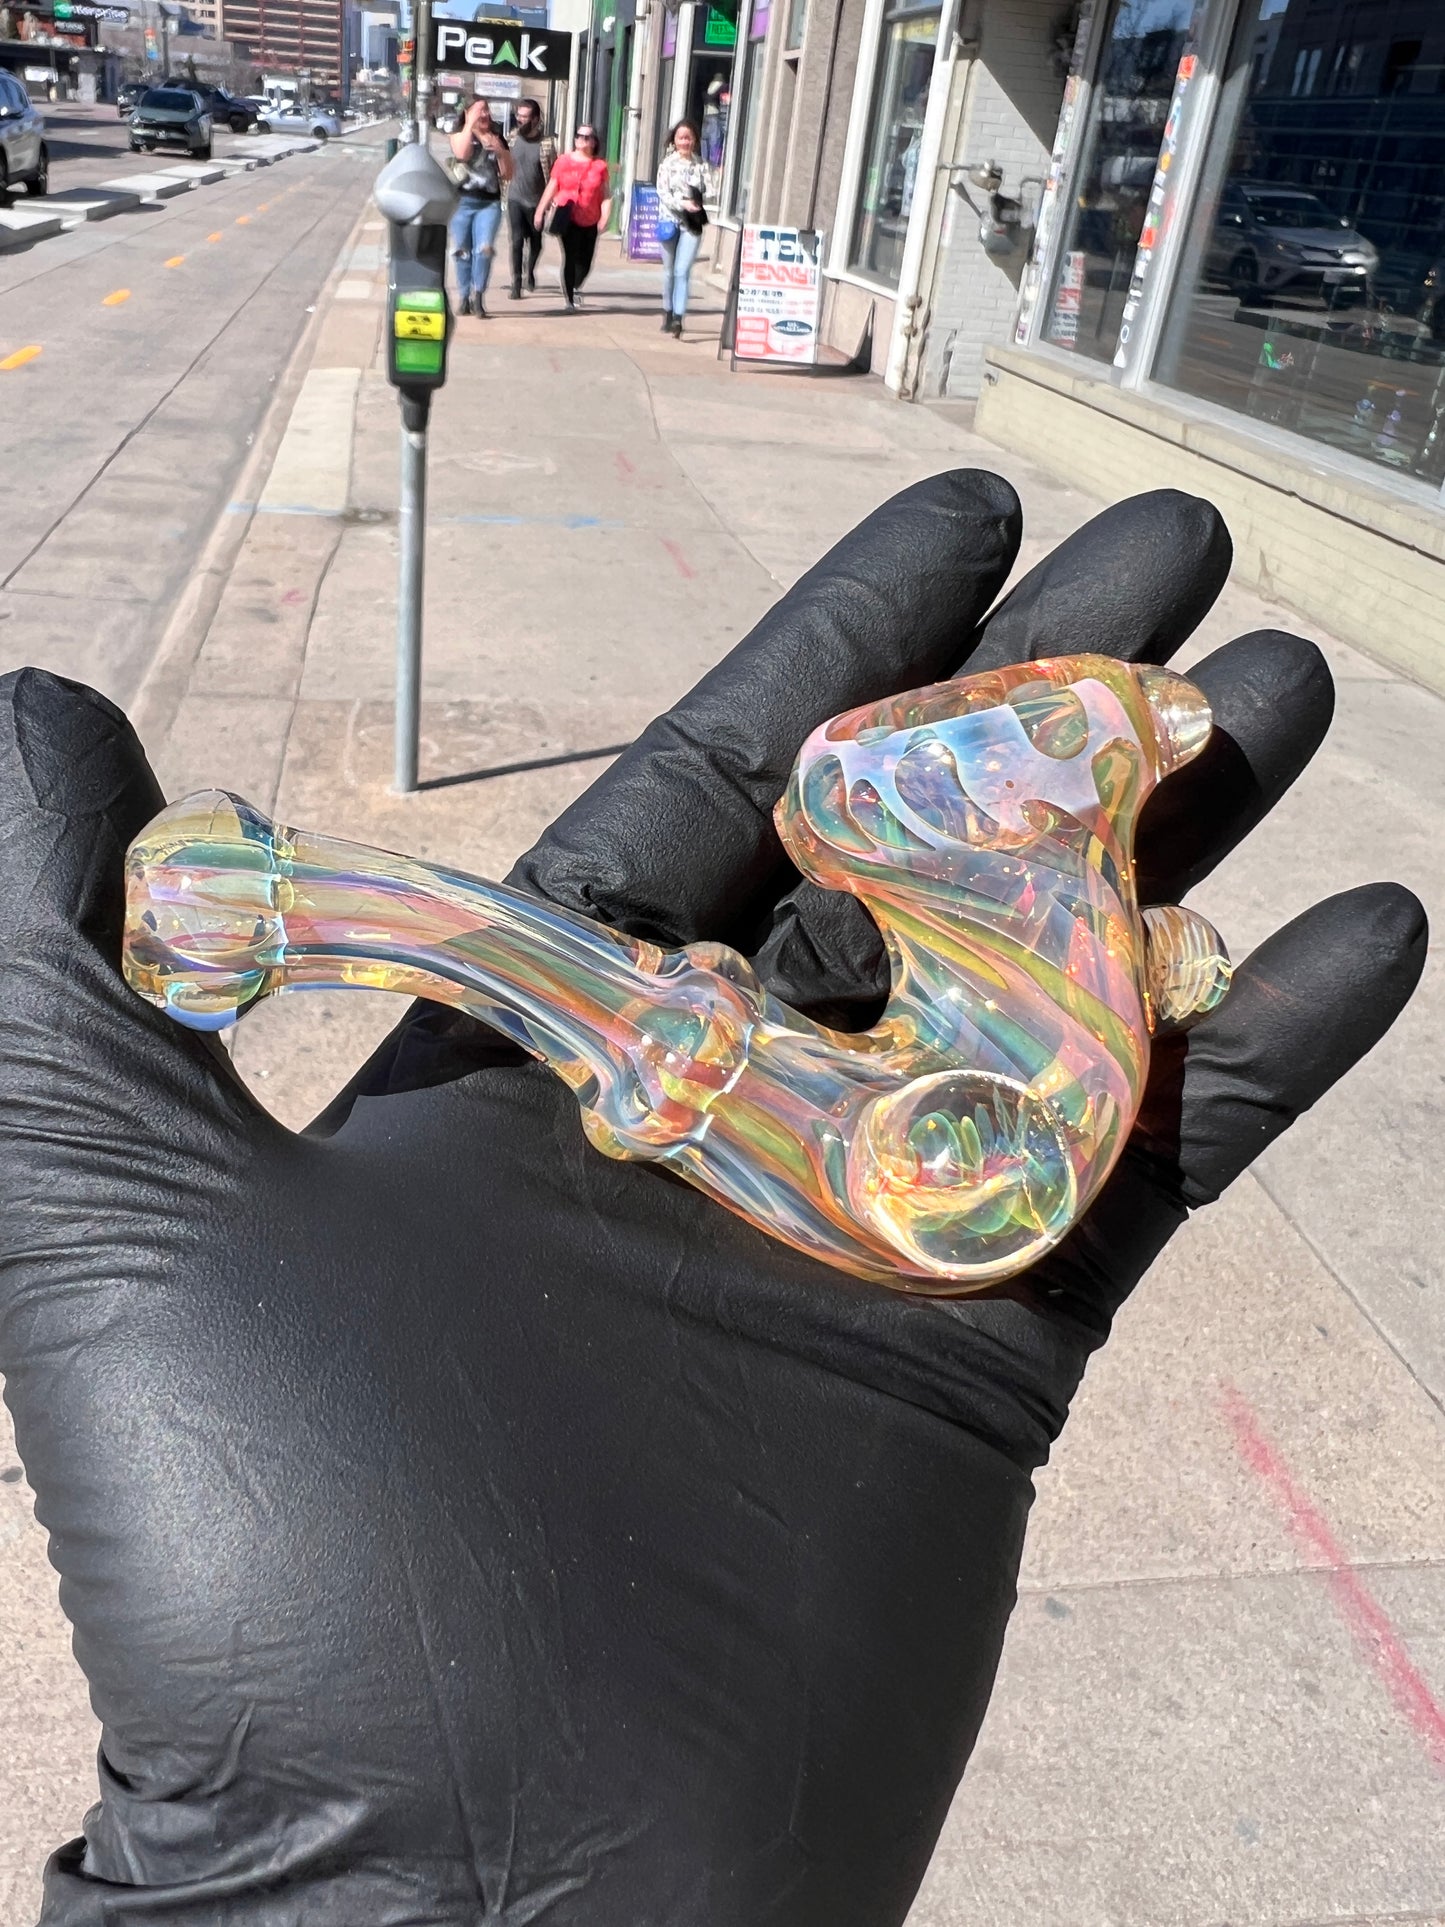 Fumed Sherlock with Mibs by Simon (Sigh Glass)